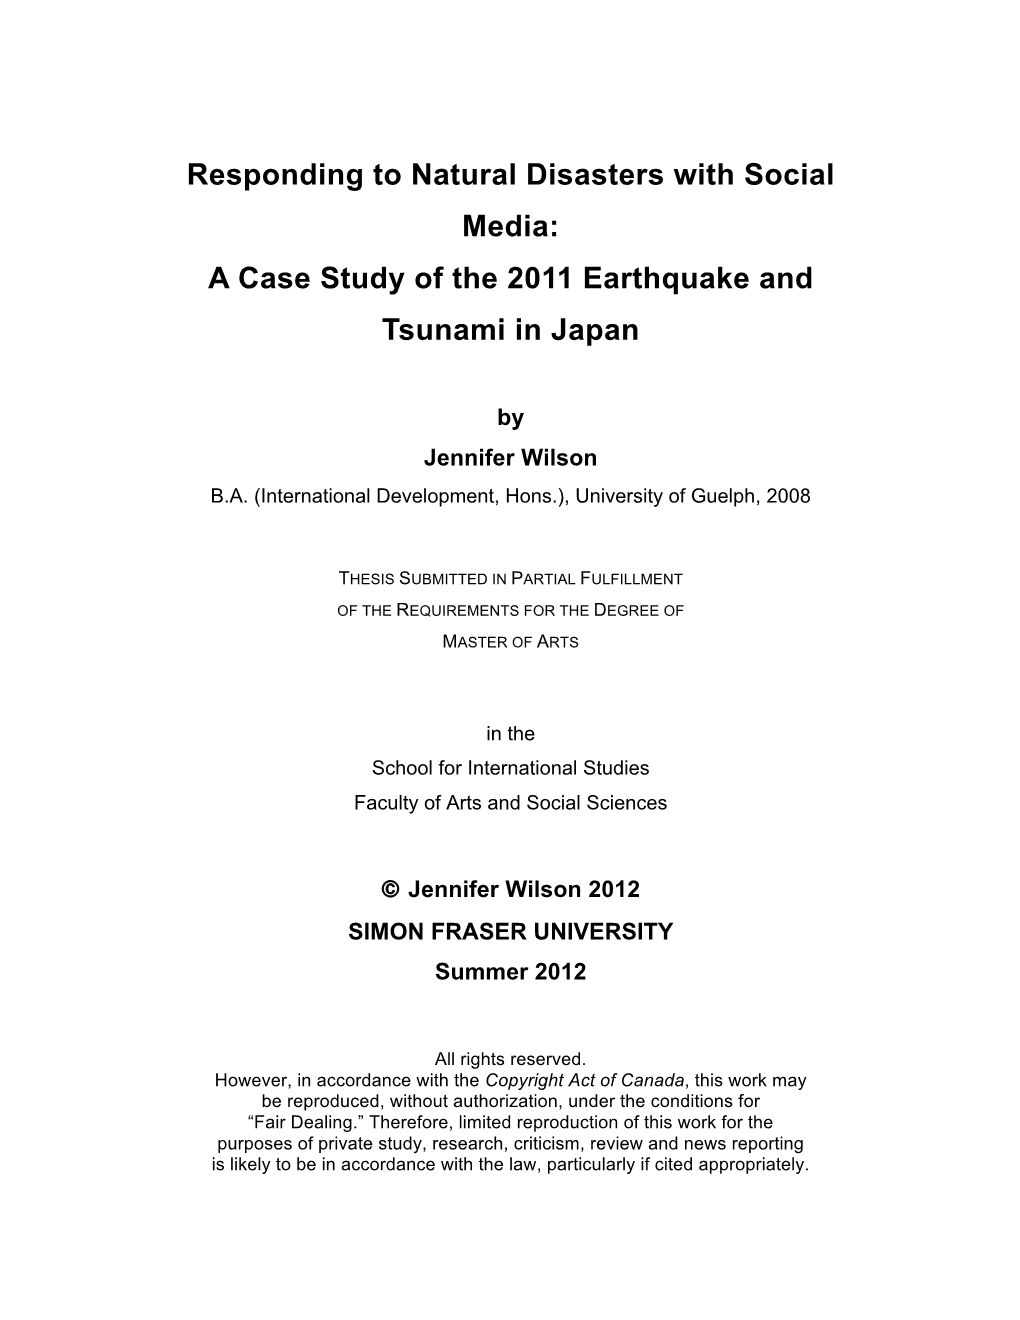 Responding to Natural Disasters with Social Media: a Case Study of the 2011 Earthquake and Tsunami in Japan